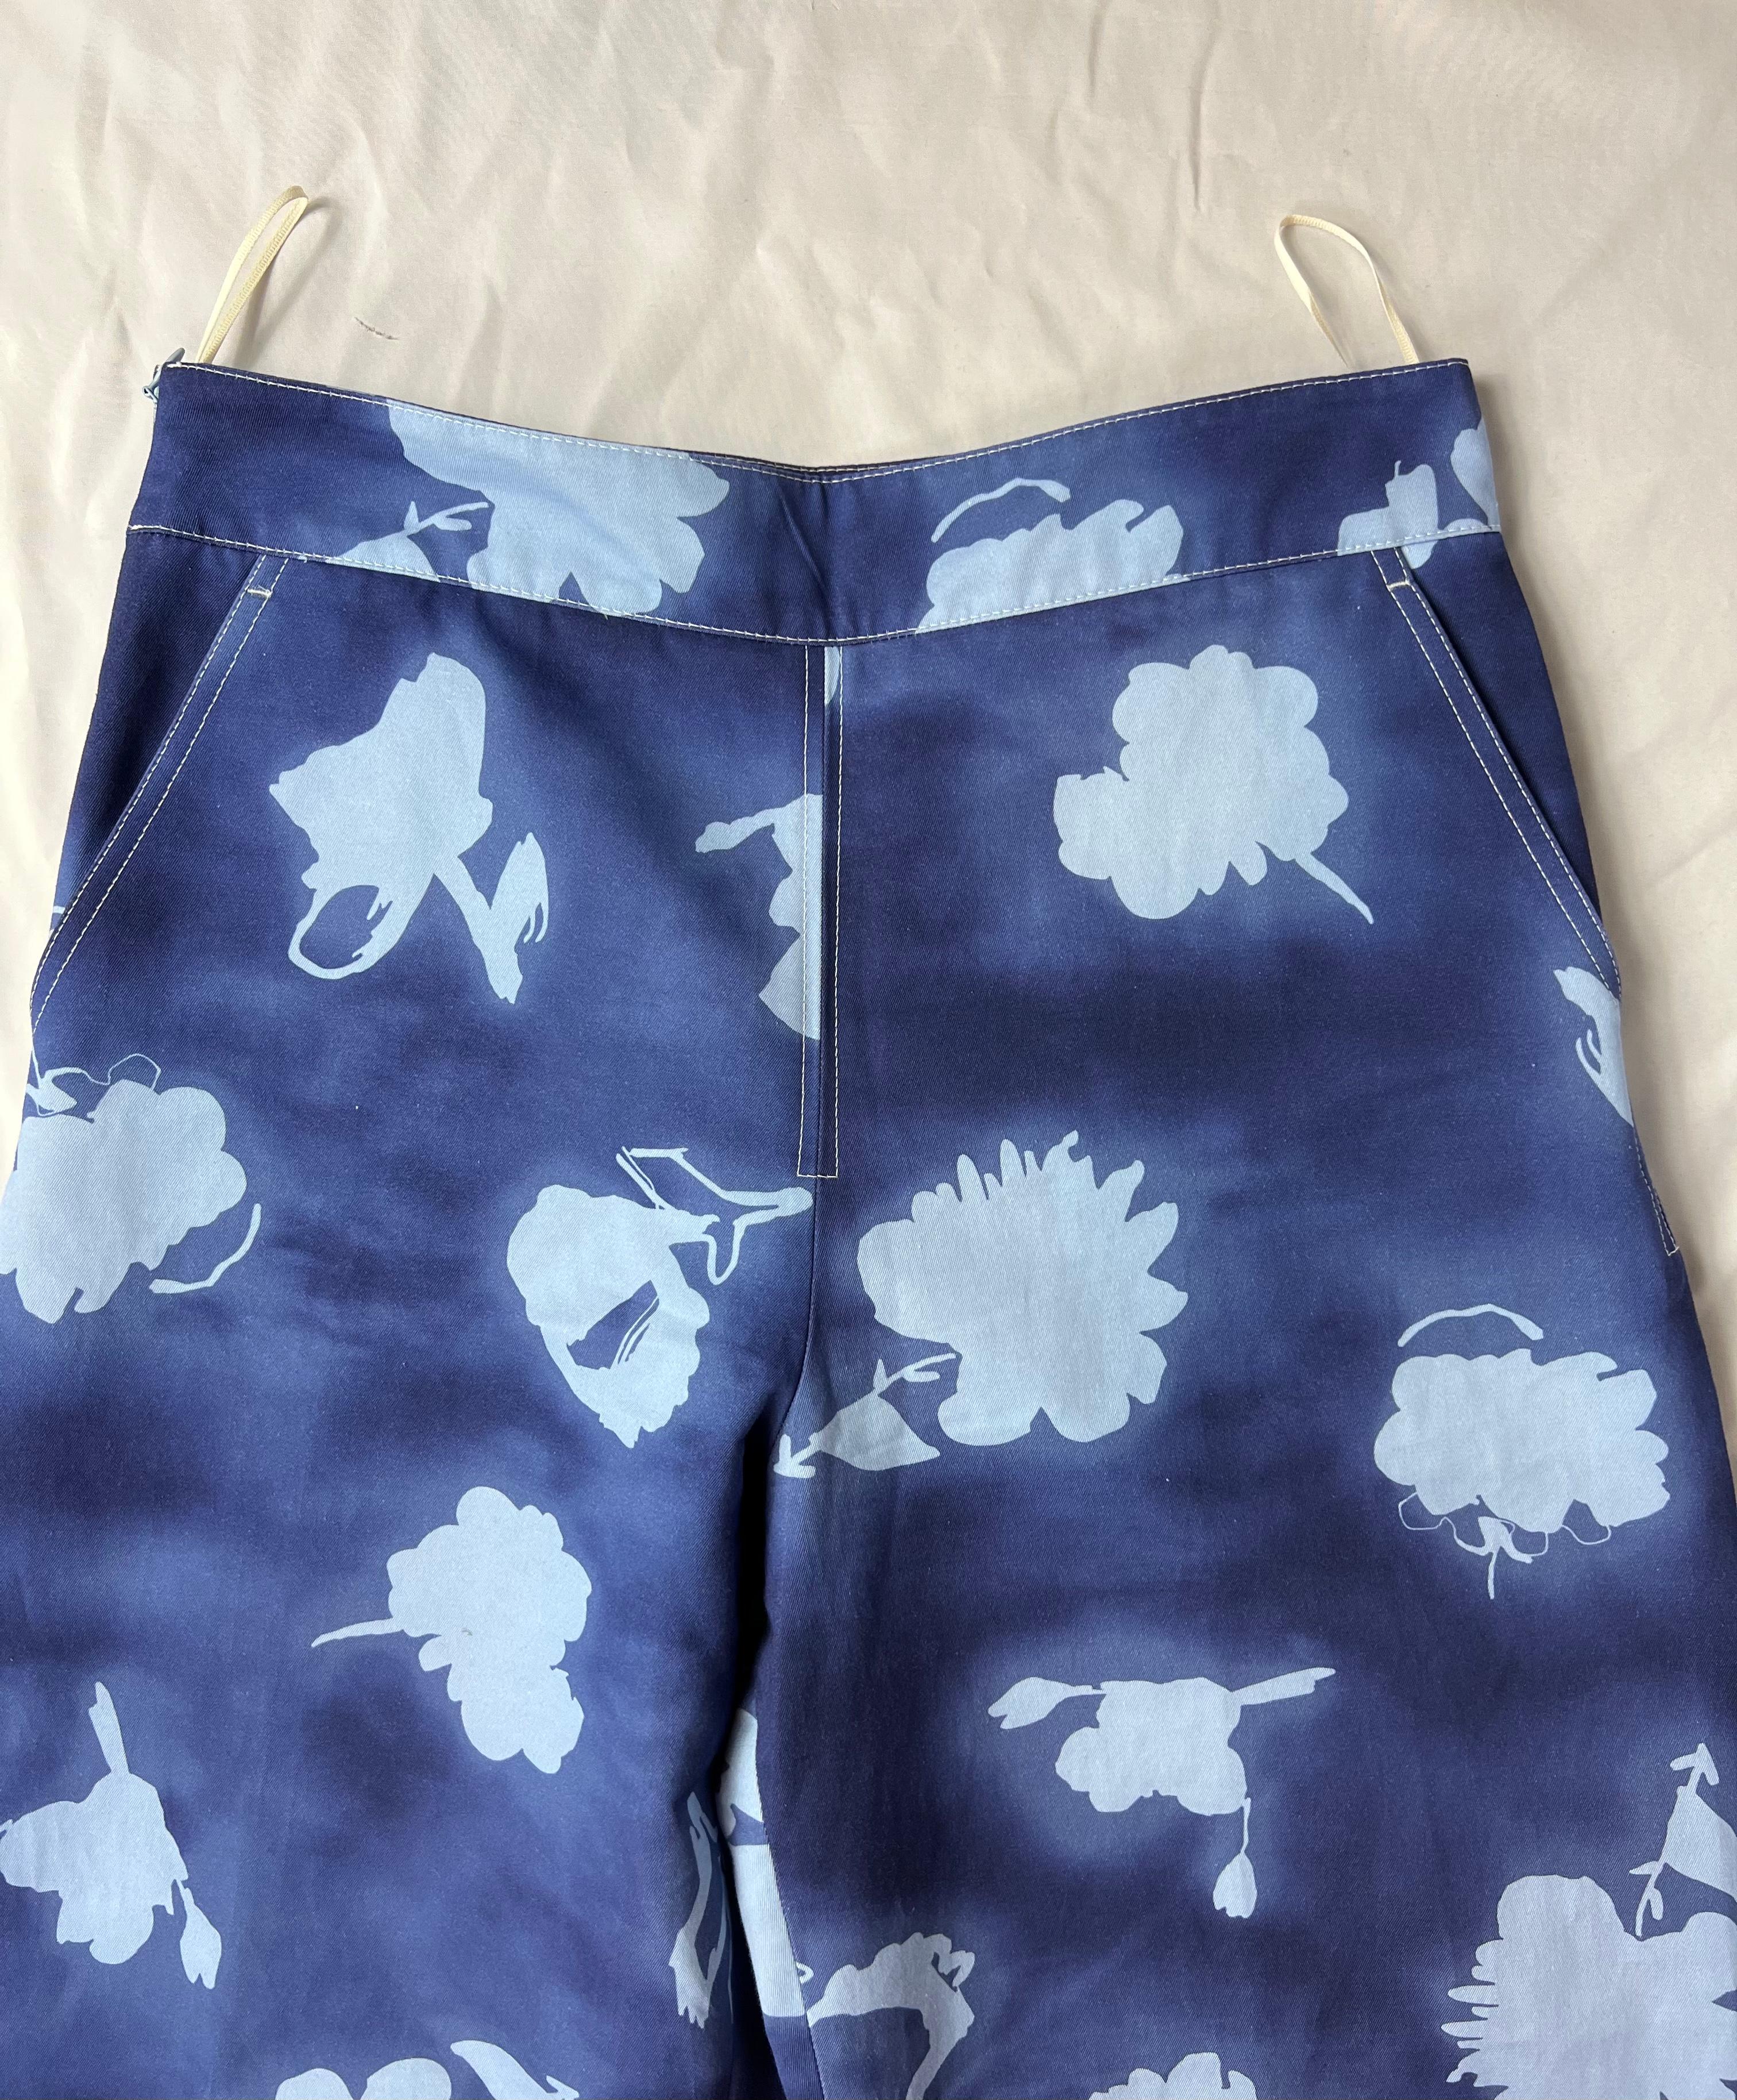 Marni Blue Pants, Size 42

- High waisted
- Straight leg 
- Concealed side zip closure
- Side pockets
- Floral pattern